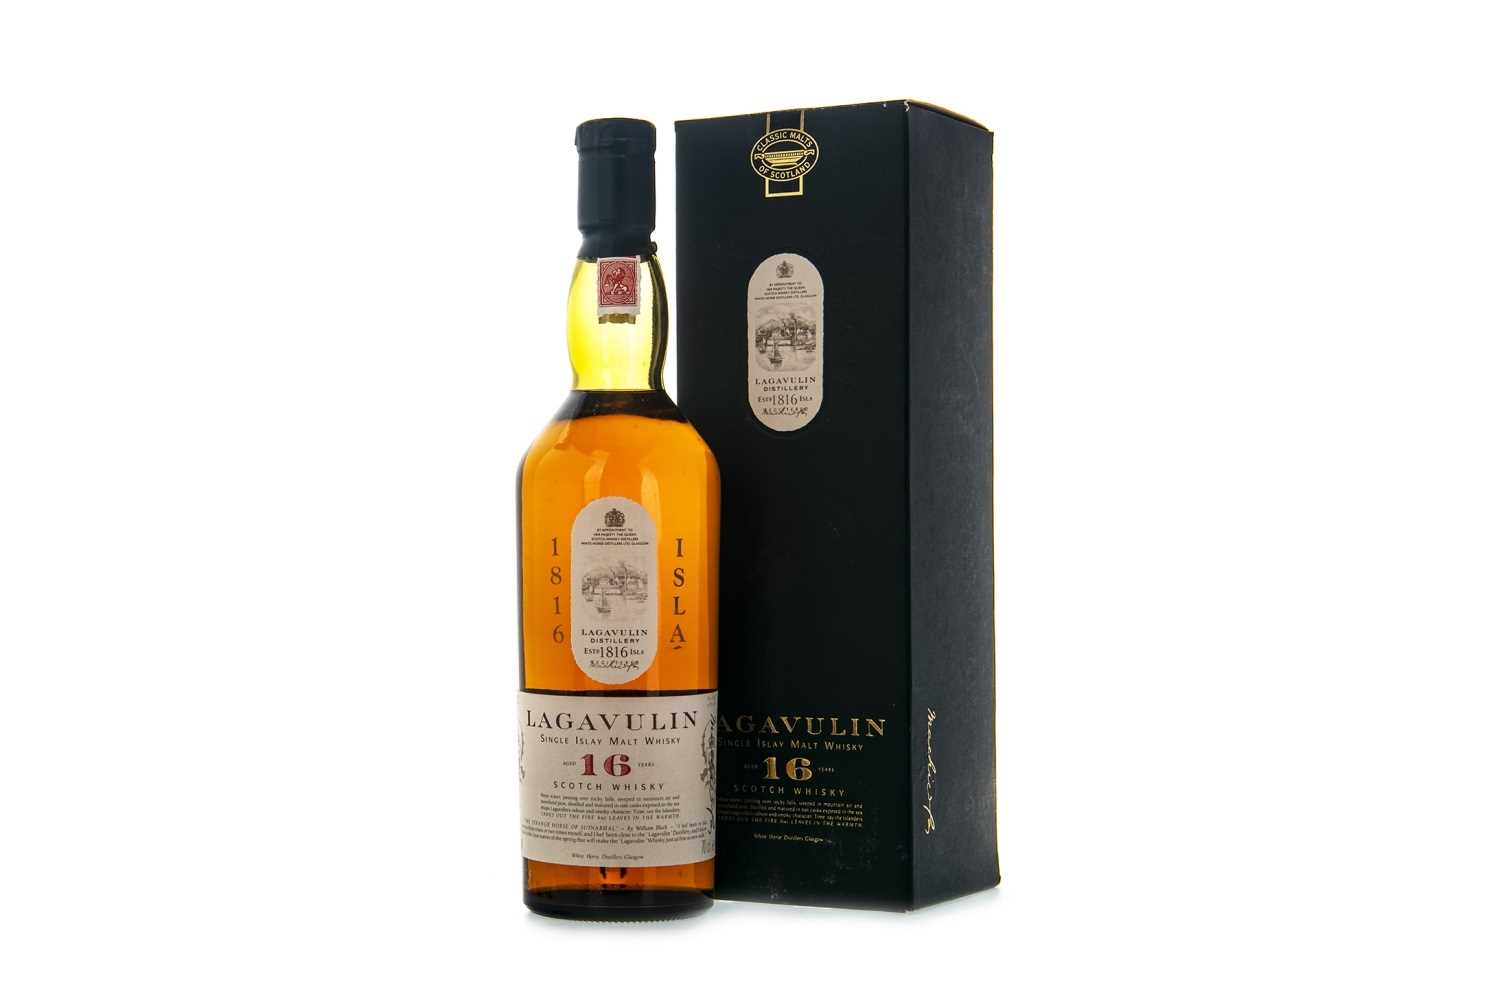 Lot 73 - LAGAVULIN AGED 16 YEARS WHITE HORSE DISTILLERS